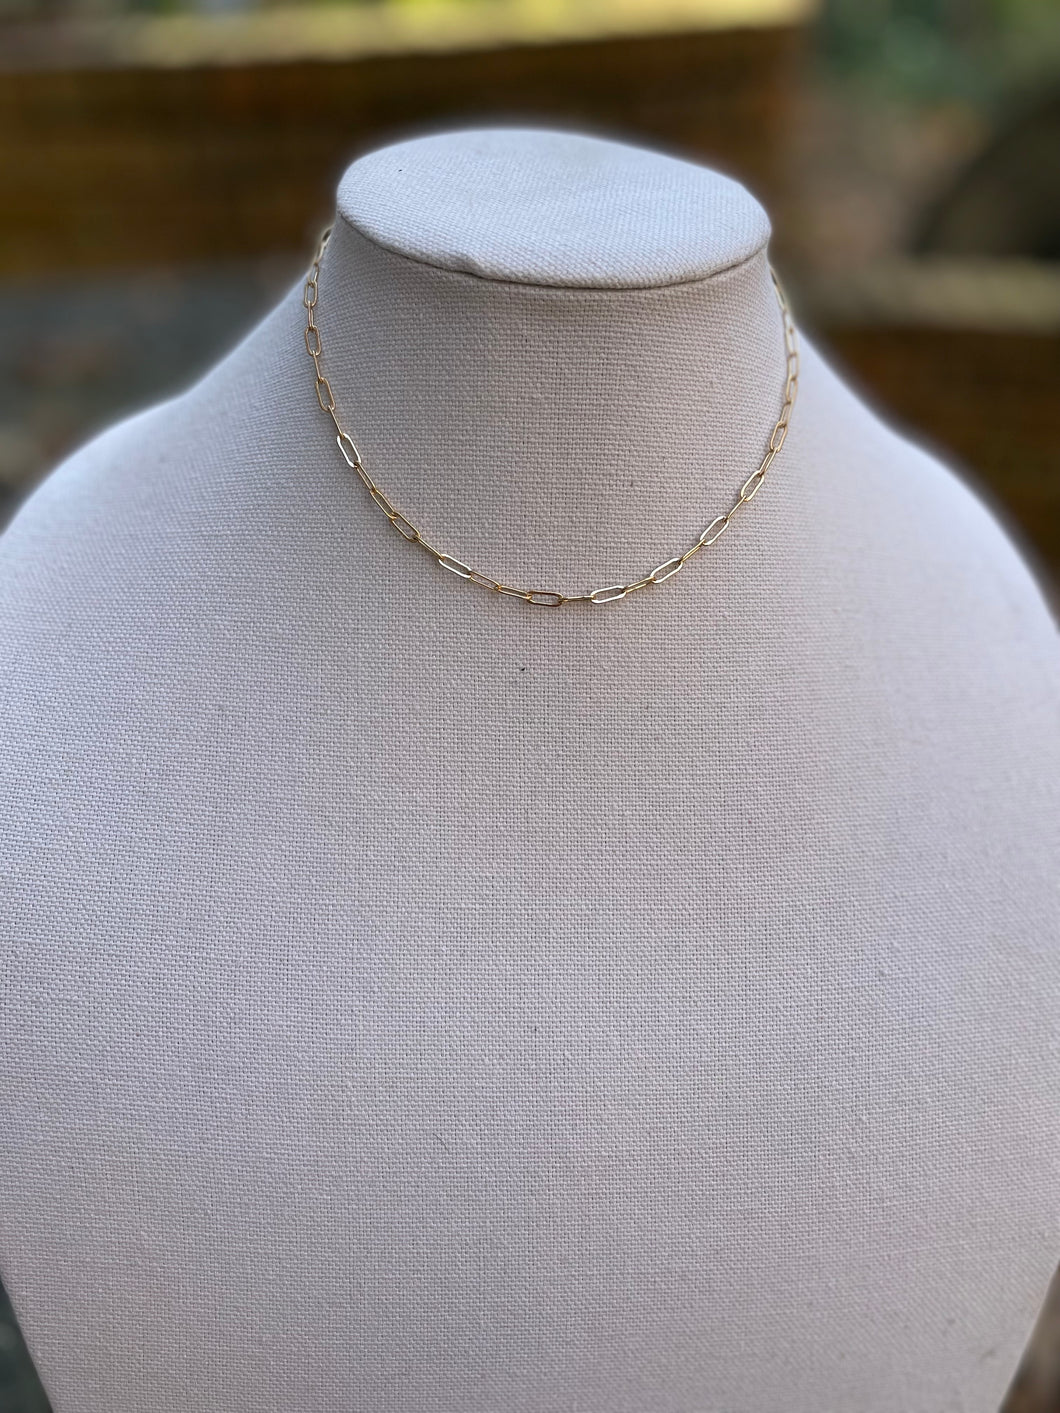 Delicate paperclip necklace